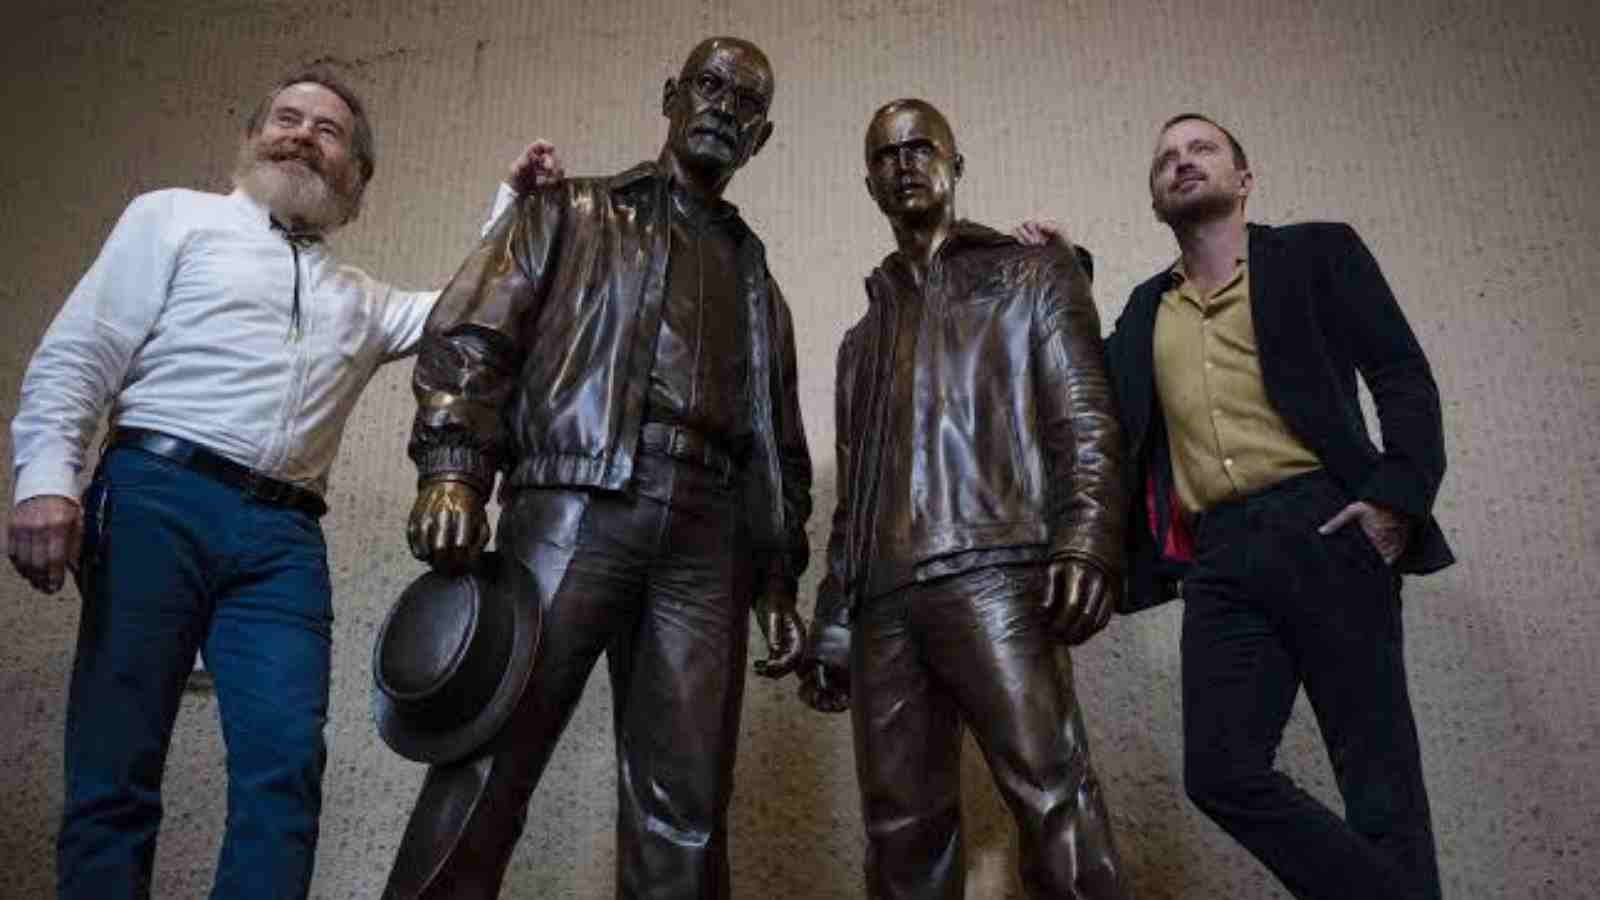 Breaking Bad statues criticised for glorifying 'meth makers'